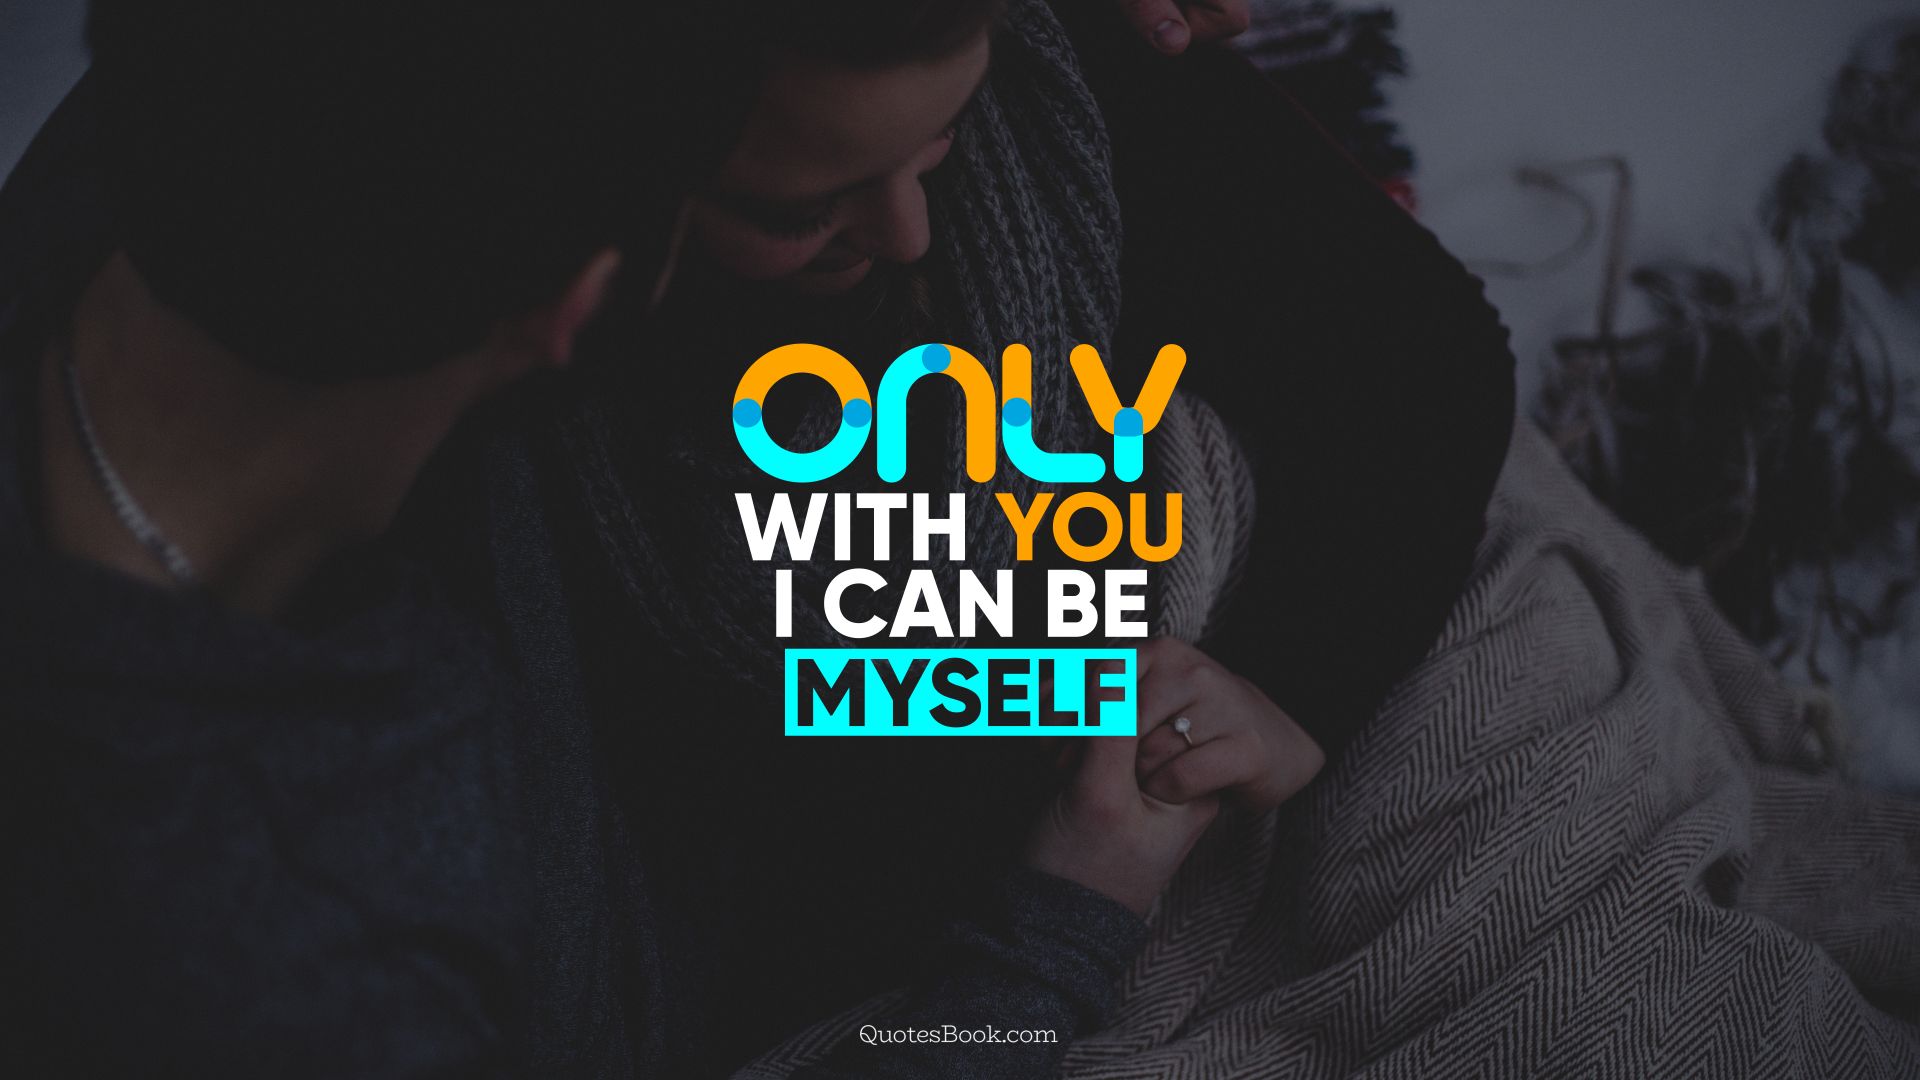 Only with you  I can be myself. - Quote by QuotesBook